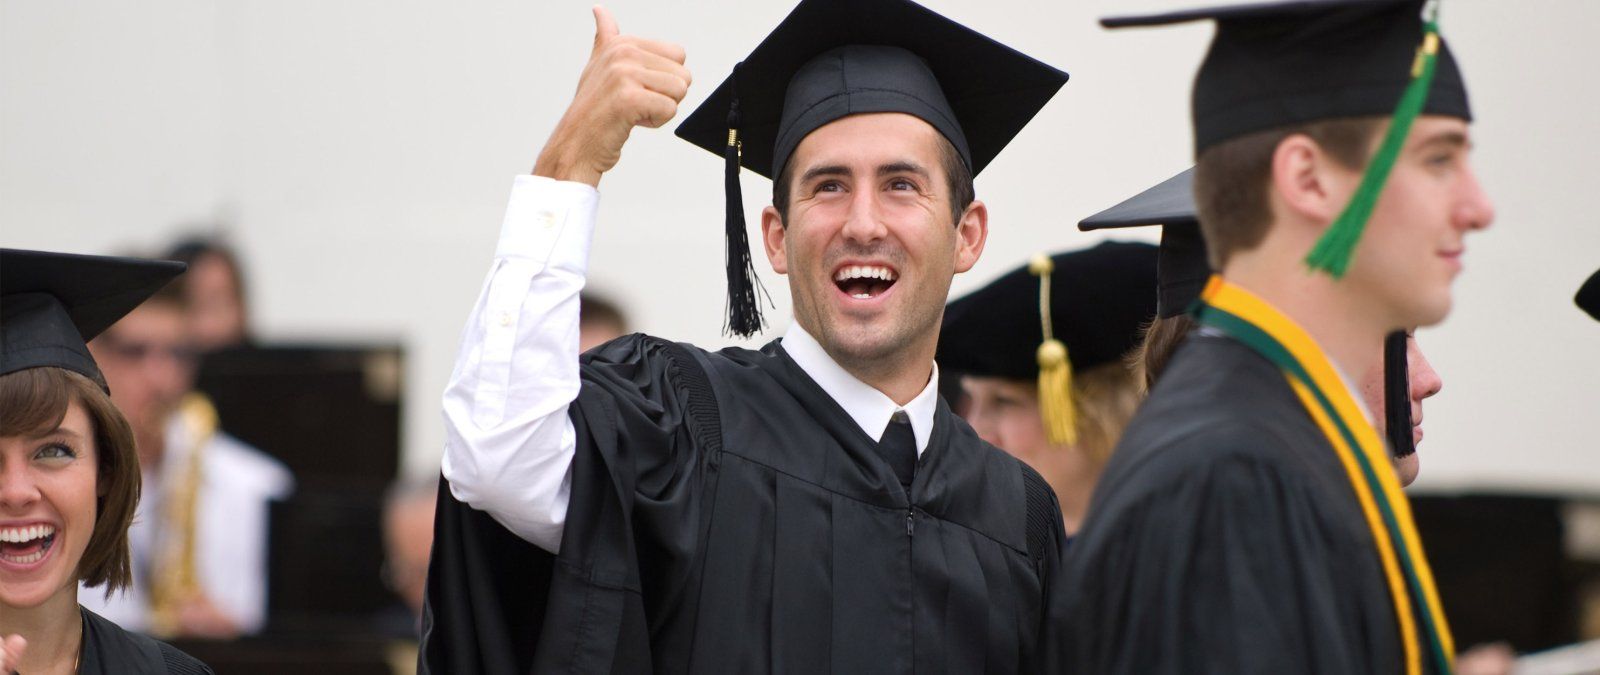 A graduating senior gives a thumbs up to his family in the audience